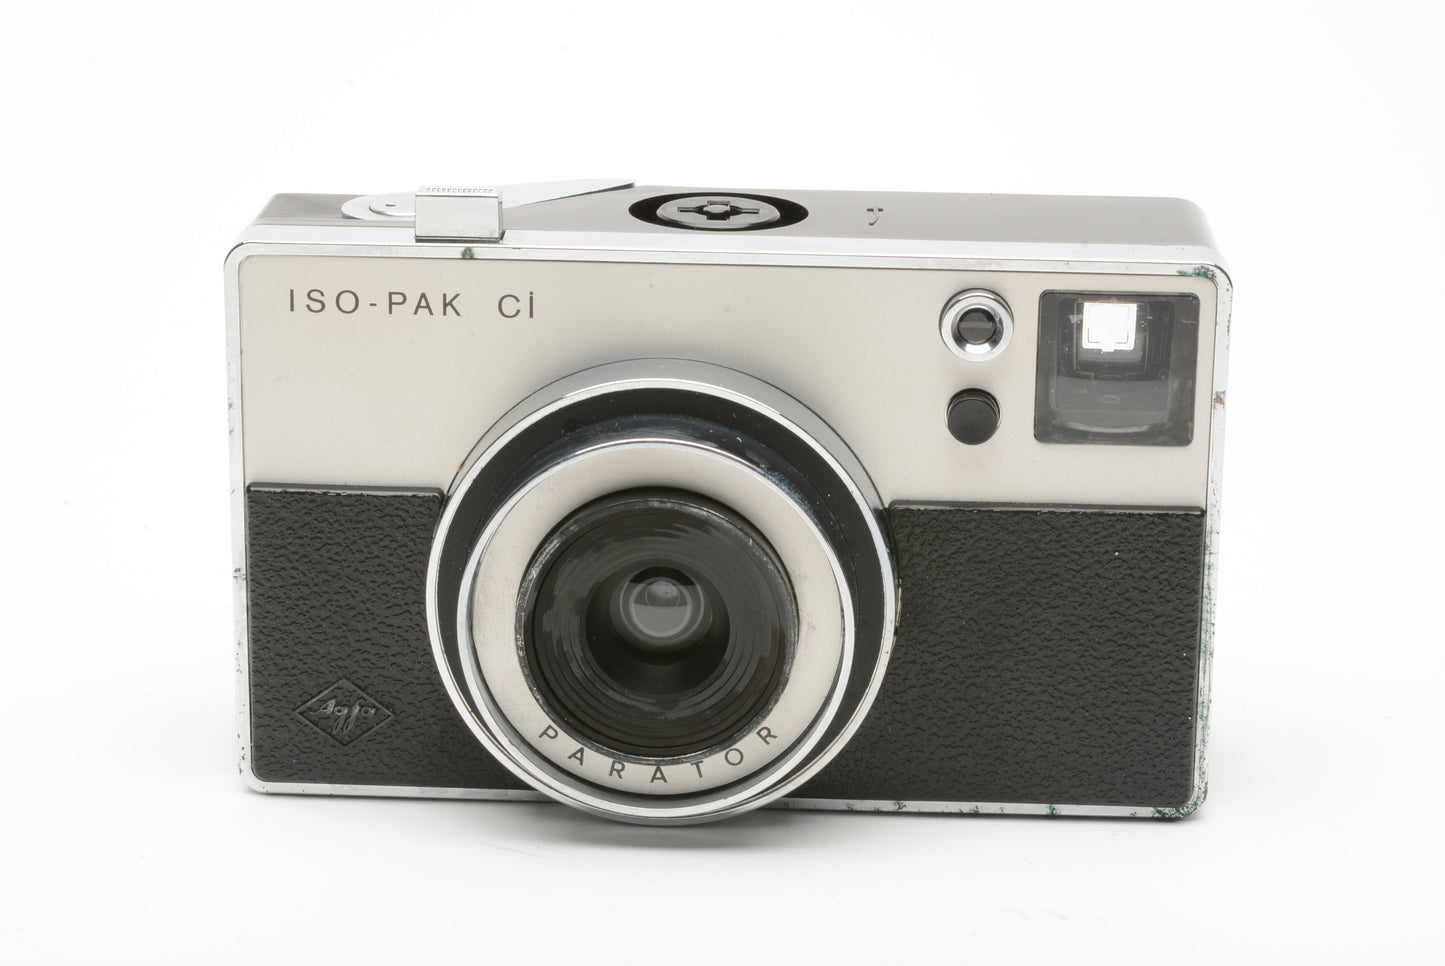 Agfa ISO-PAK CI 126 camera w/Parator lens and case